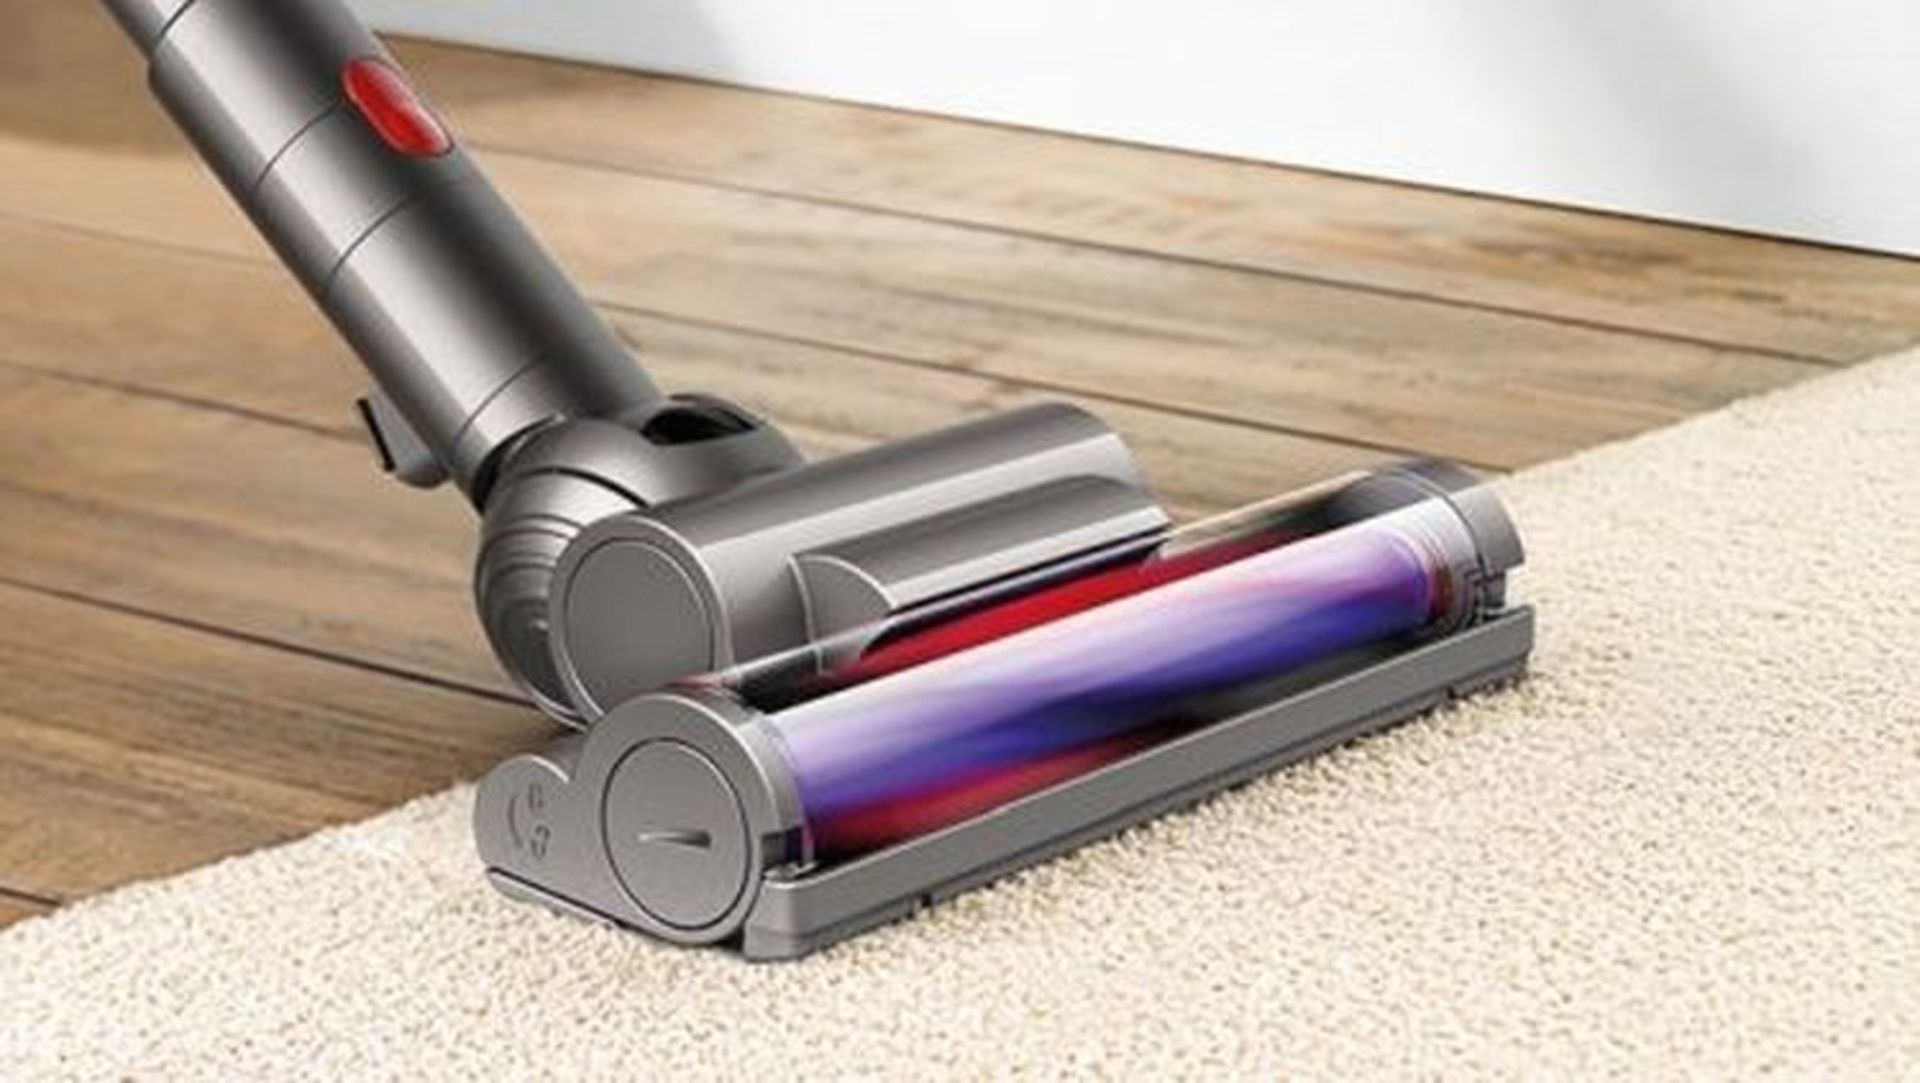 V Brand New Dyson Cinetic Big Ball Animal+ Vacuum Cleaner NO Filters NO Bags - Self Righting - - Image 4 of 4